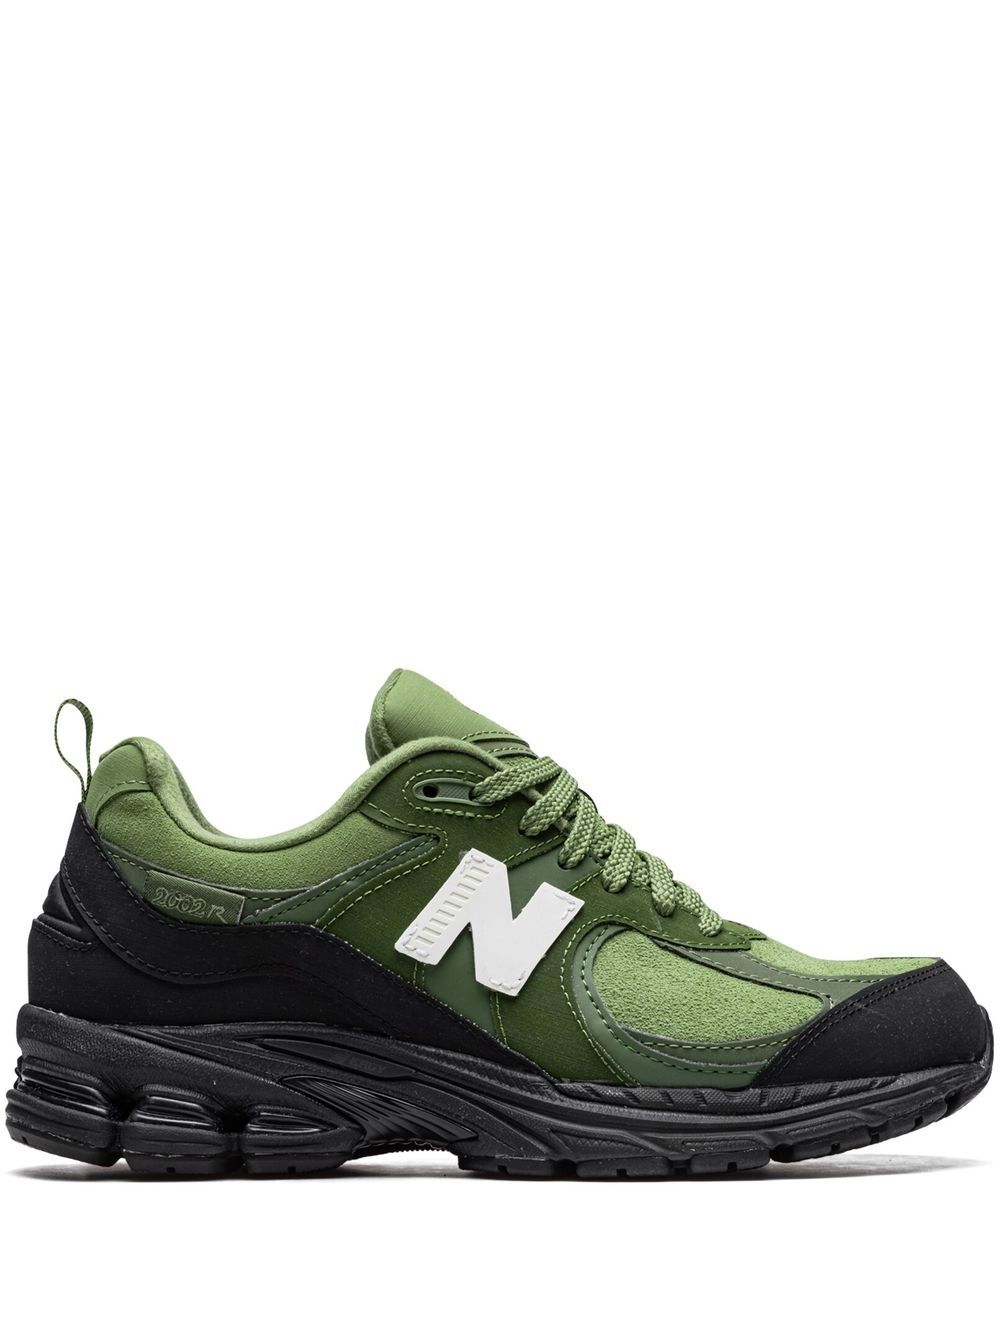 New Balance x The Basement 2002R sneakers - Green